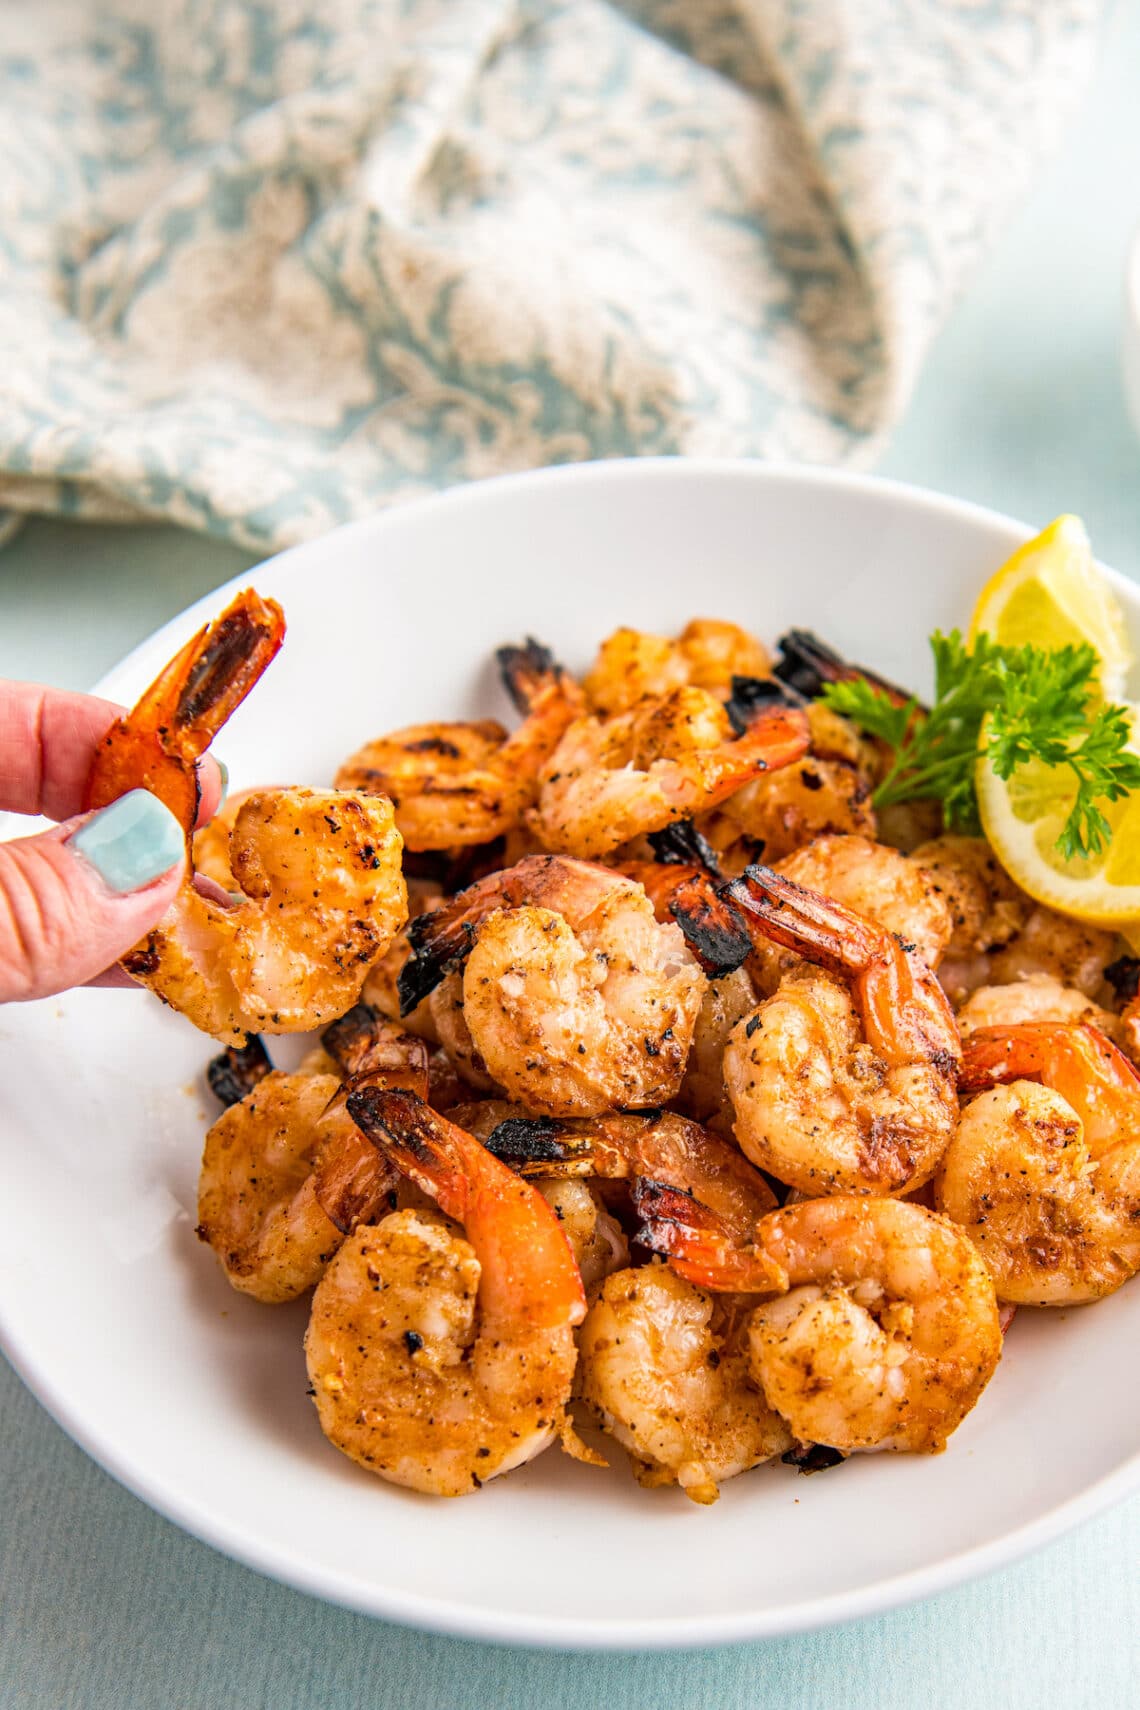 The Best Grilled Shrimp In 15 Minutes | Easy Dinner Ideas